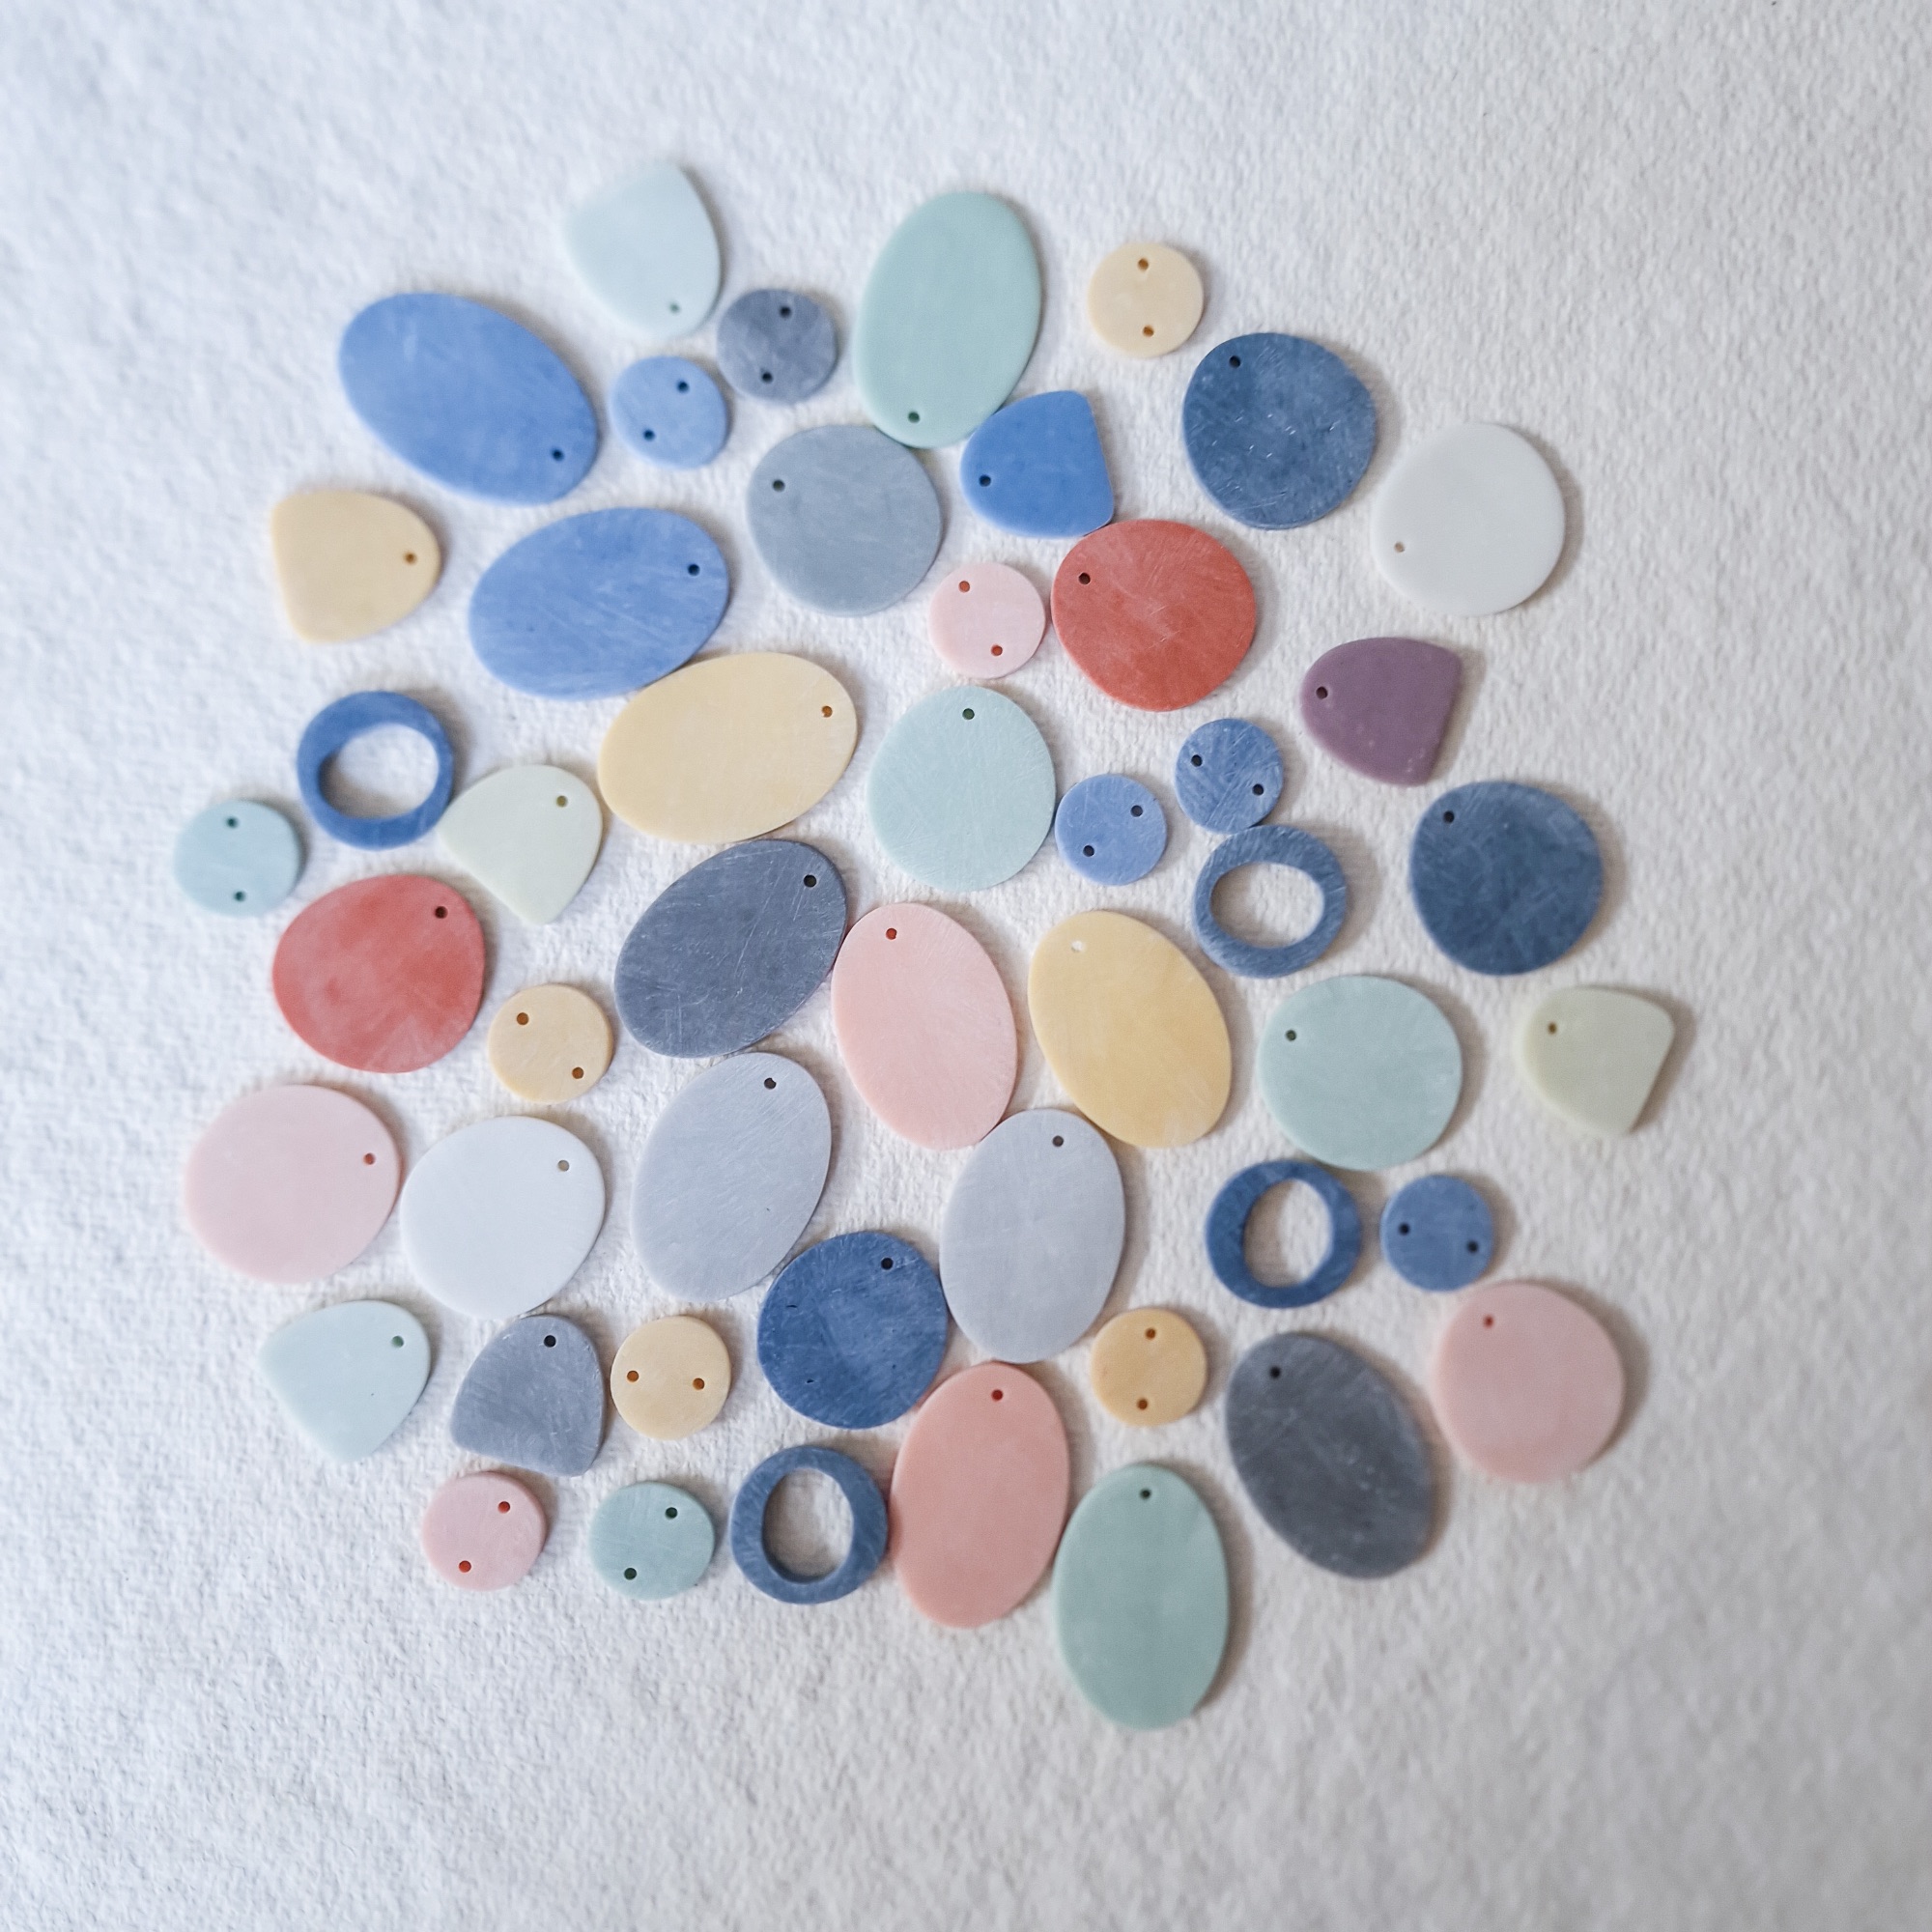 Polymer clay earring beads after sanding